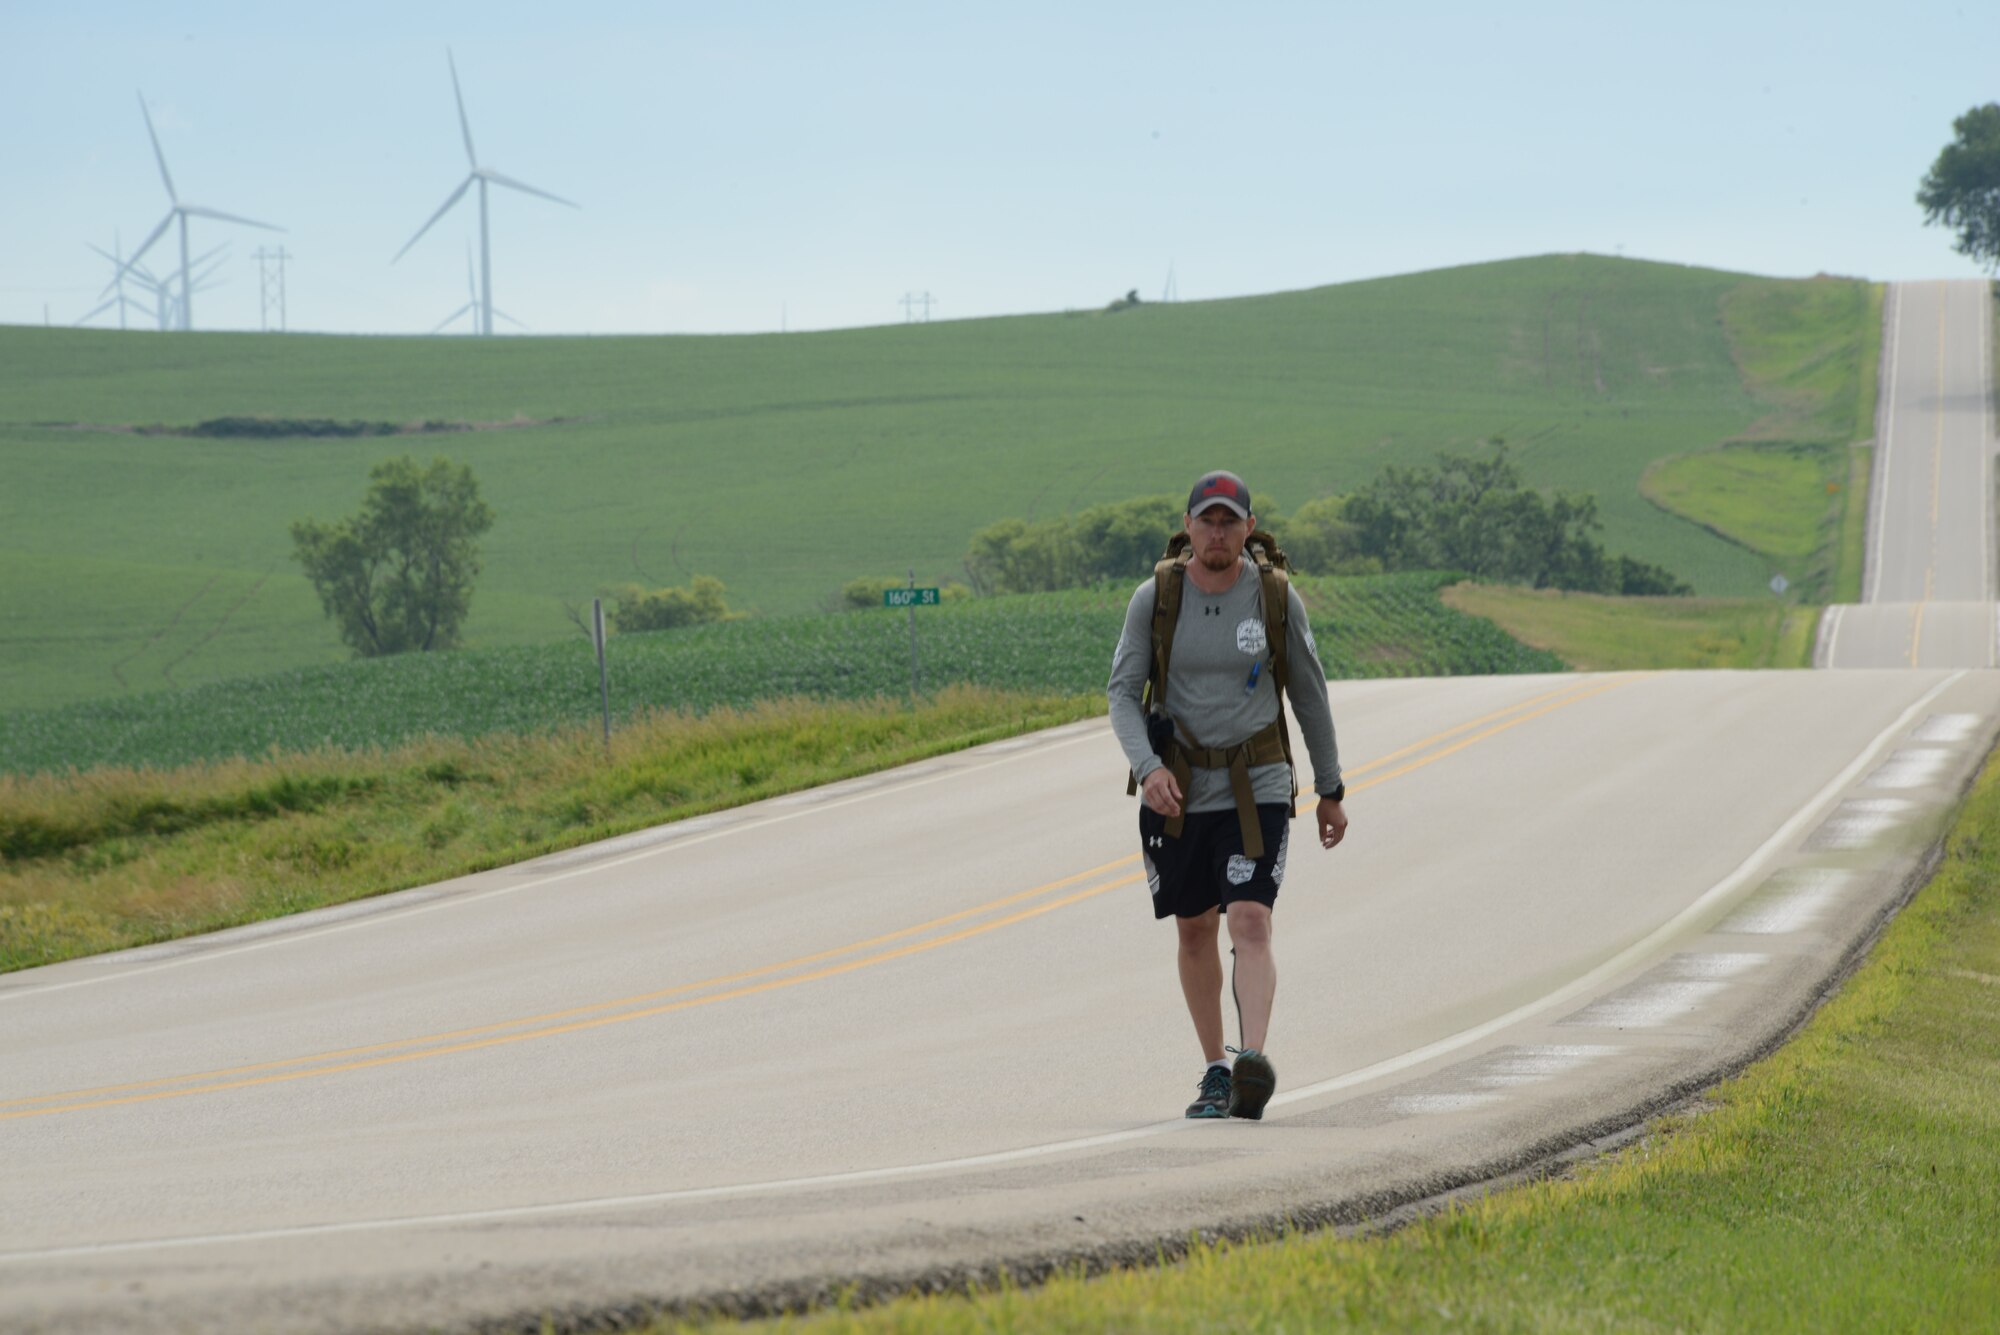 Technical Sgt. Jeff Campbell is walking across the state of Iowa, in order to raise awareness about mental health.